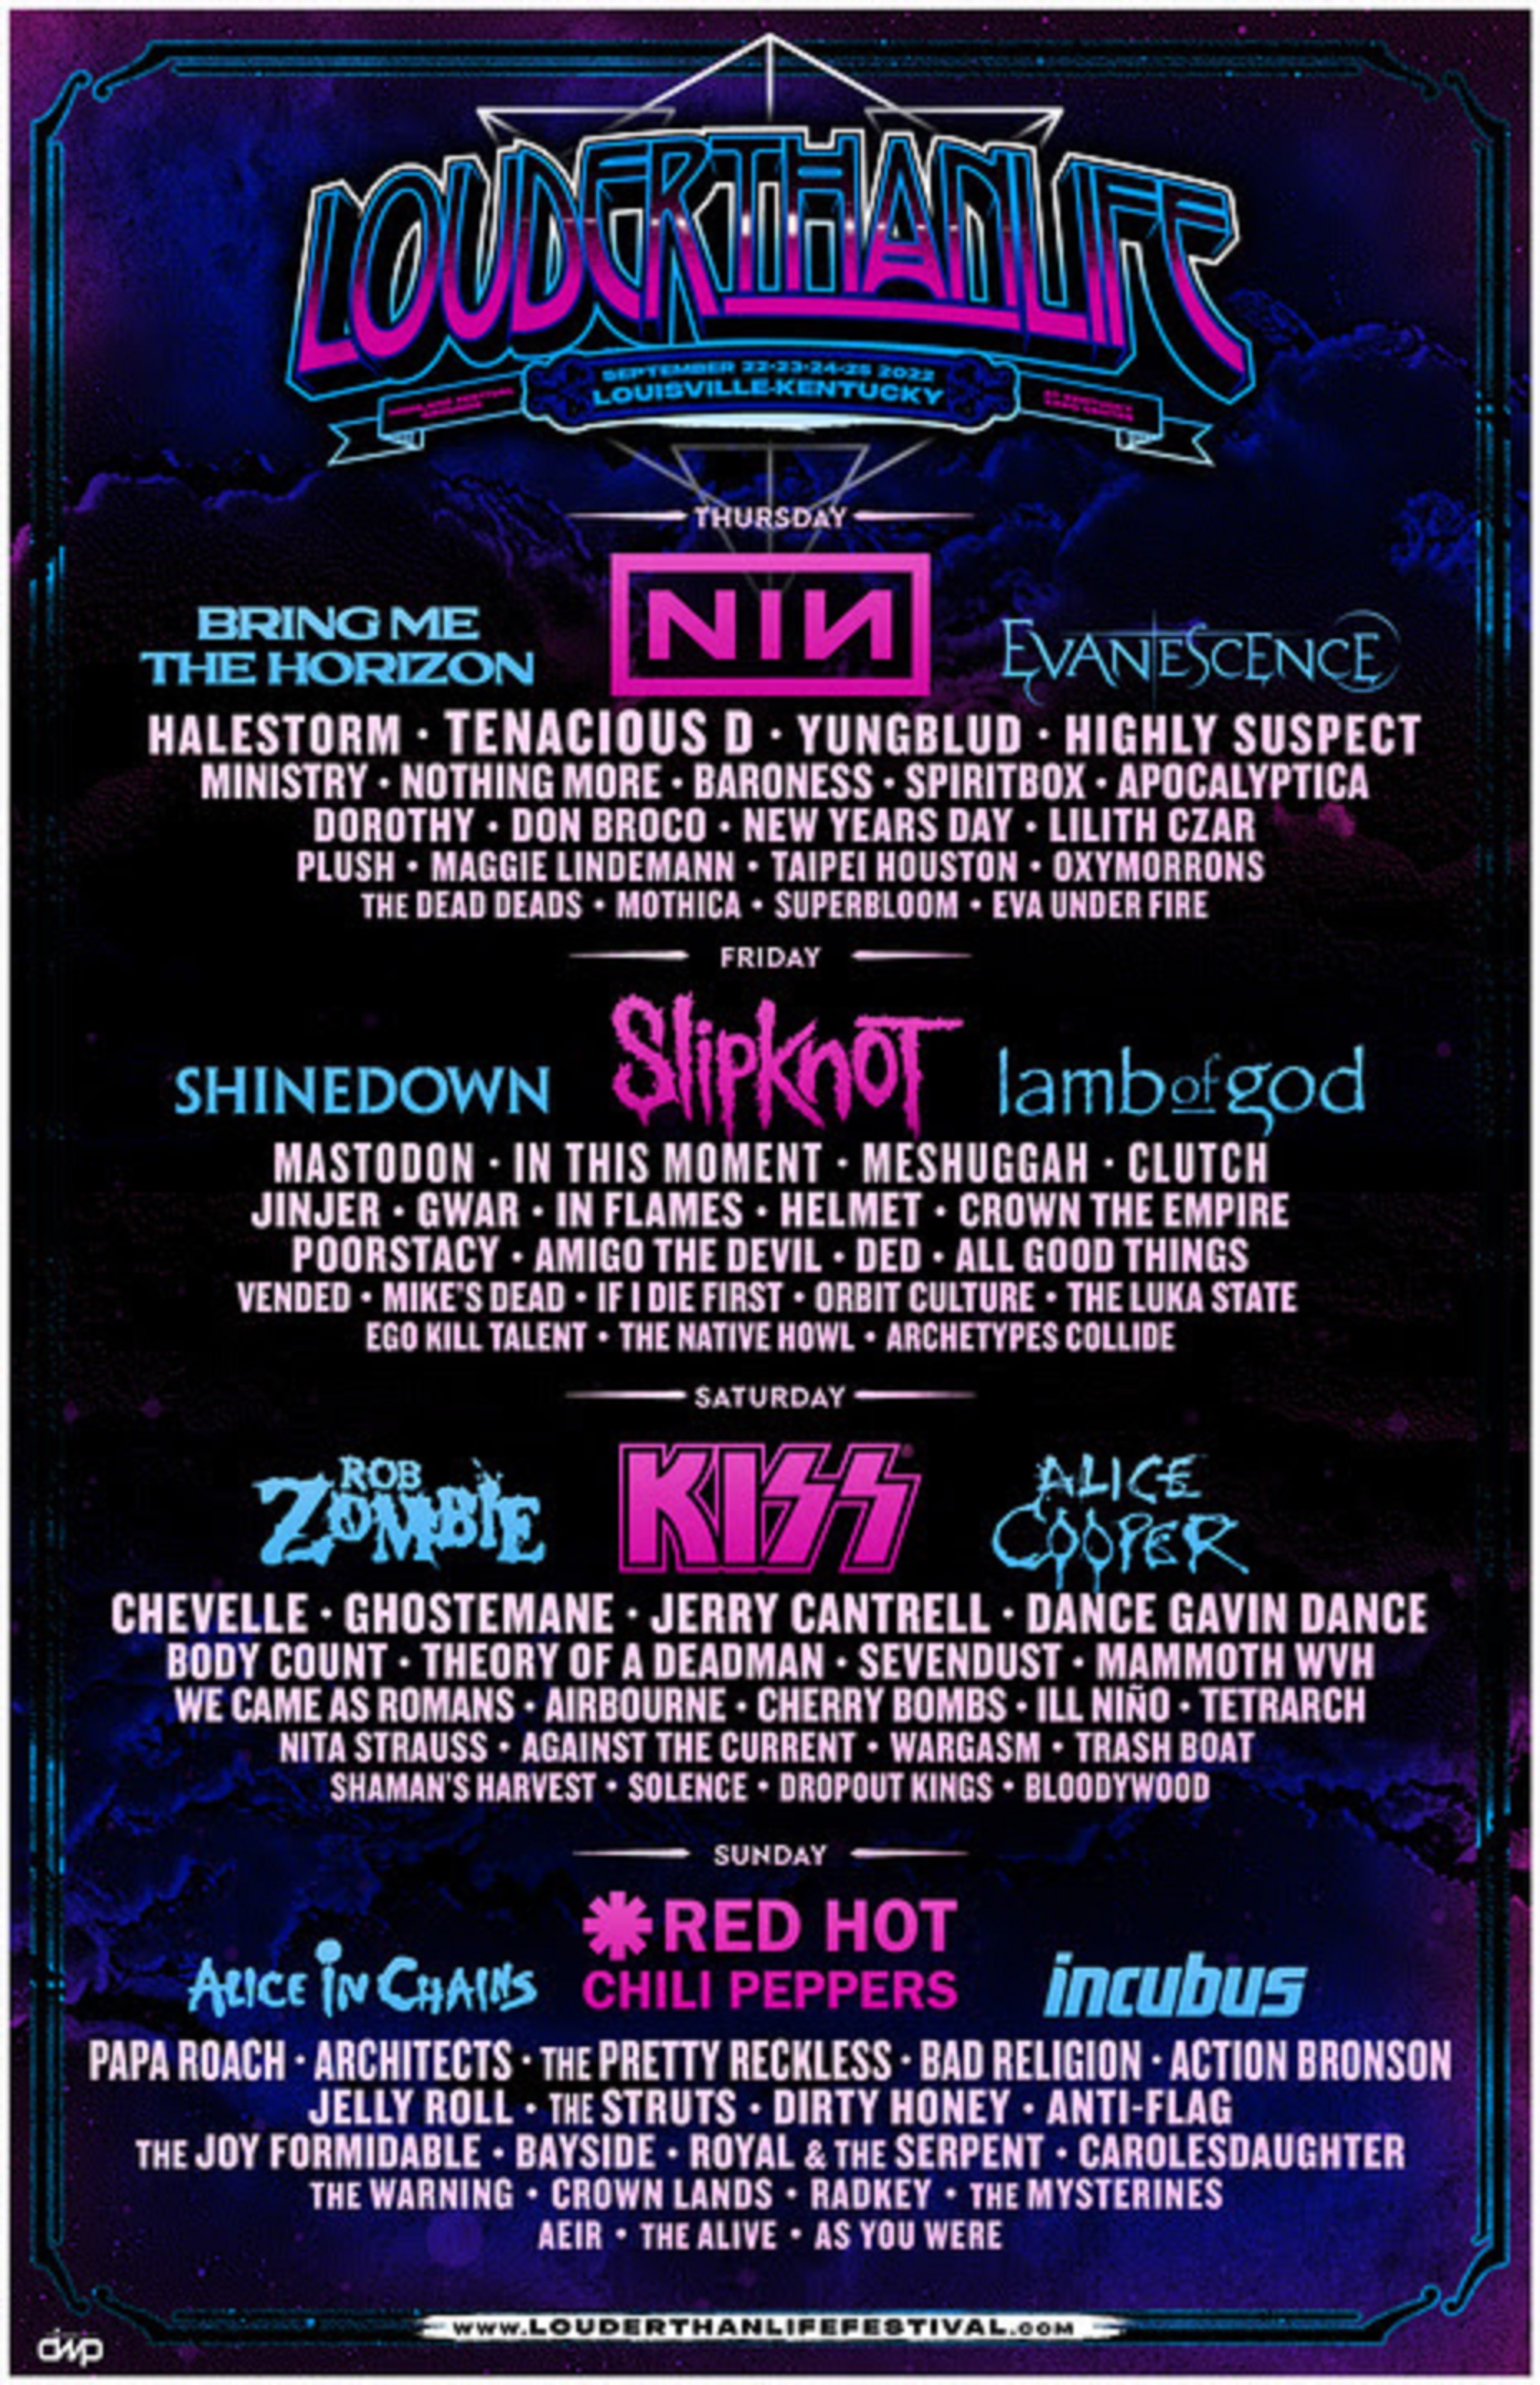 Red Hot Chili Peppers, Nine Inch Nails, Slipknot & KISS To Headline Louder Than Life 2022